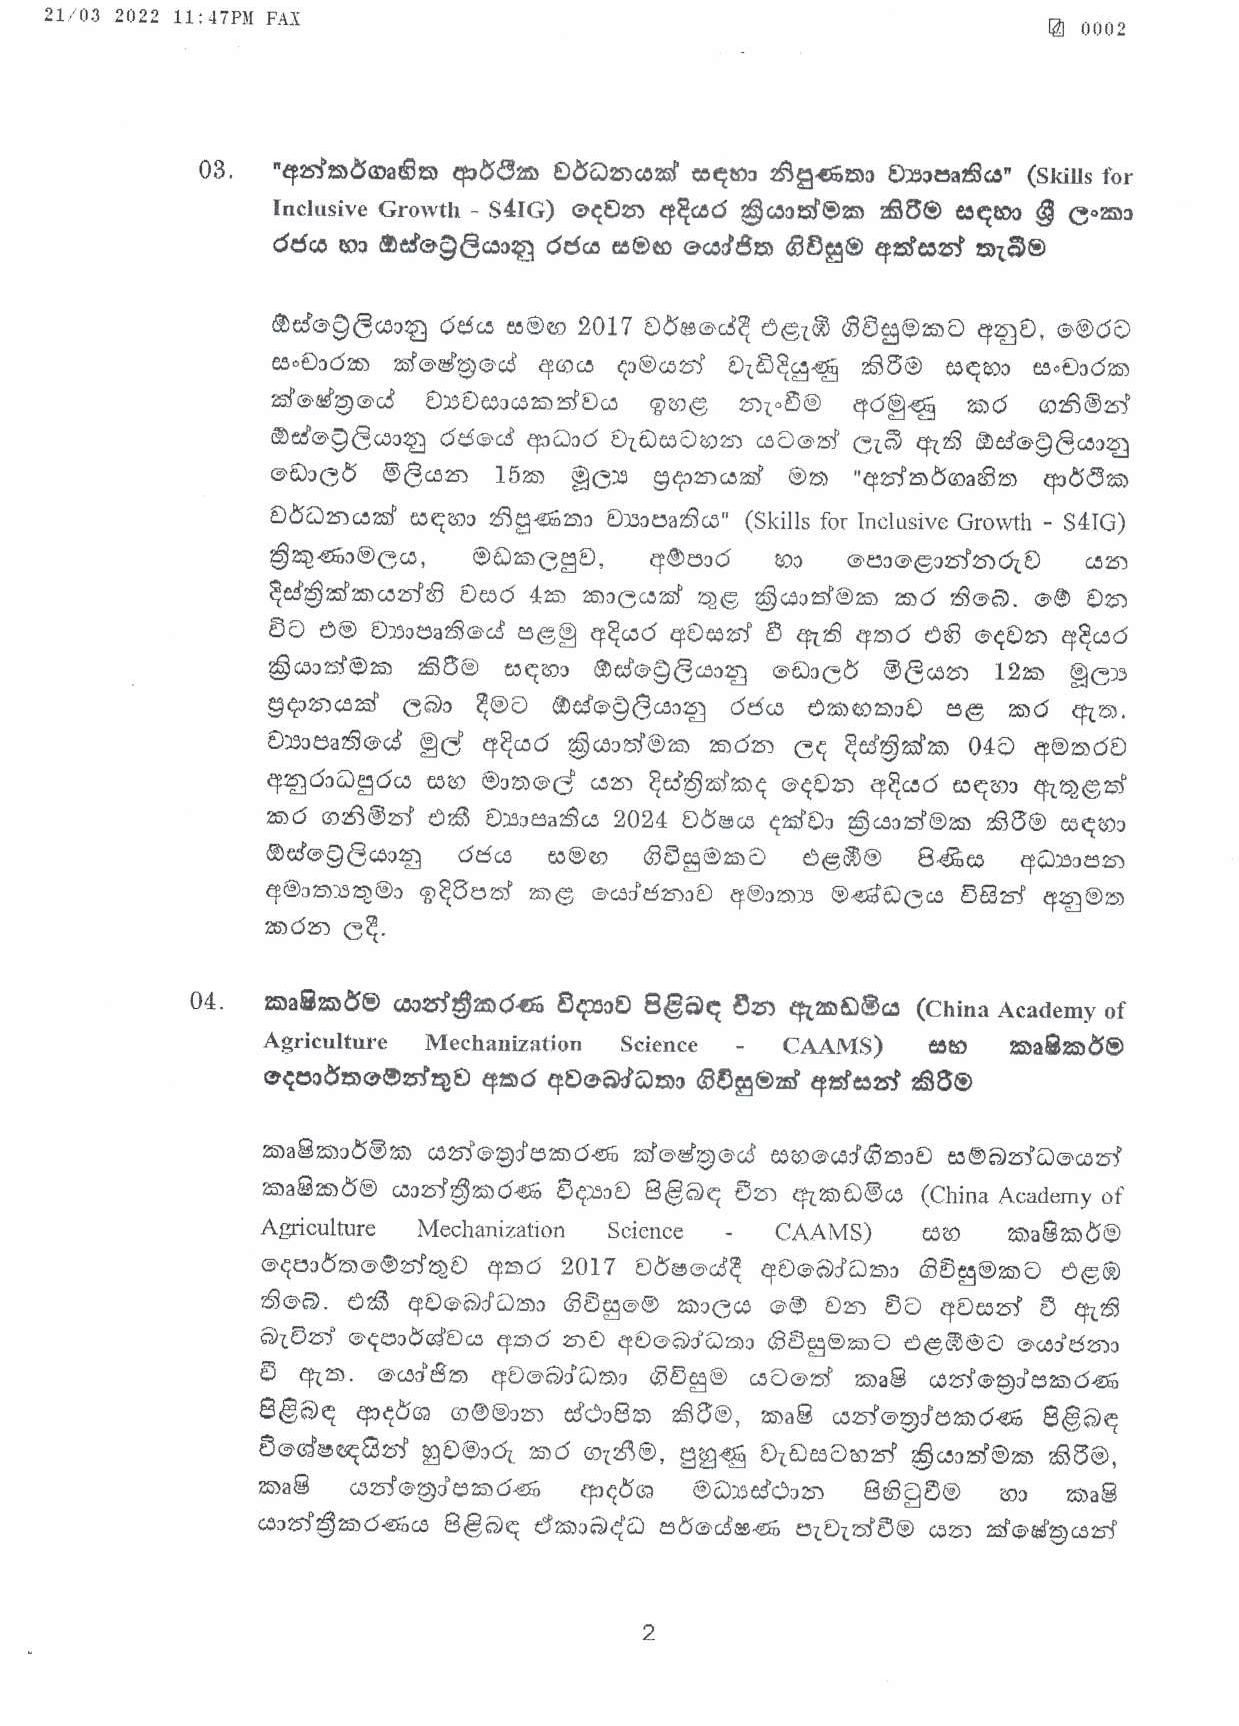 Cabinet Decisions on 21.03.2022 page 002